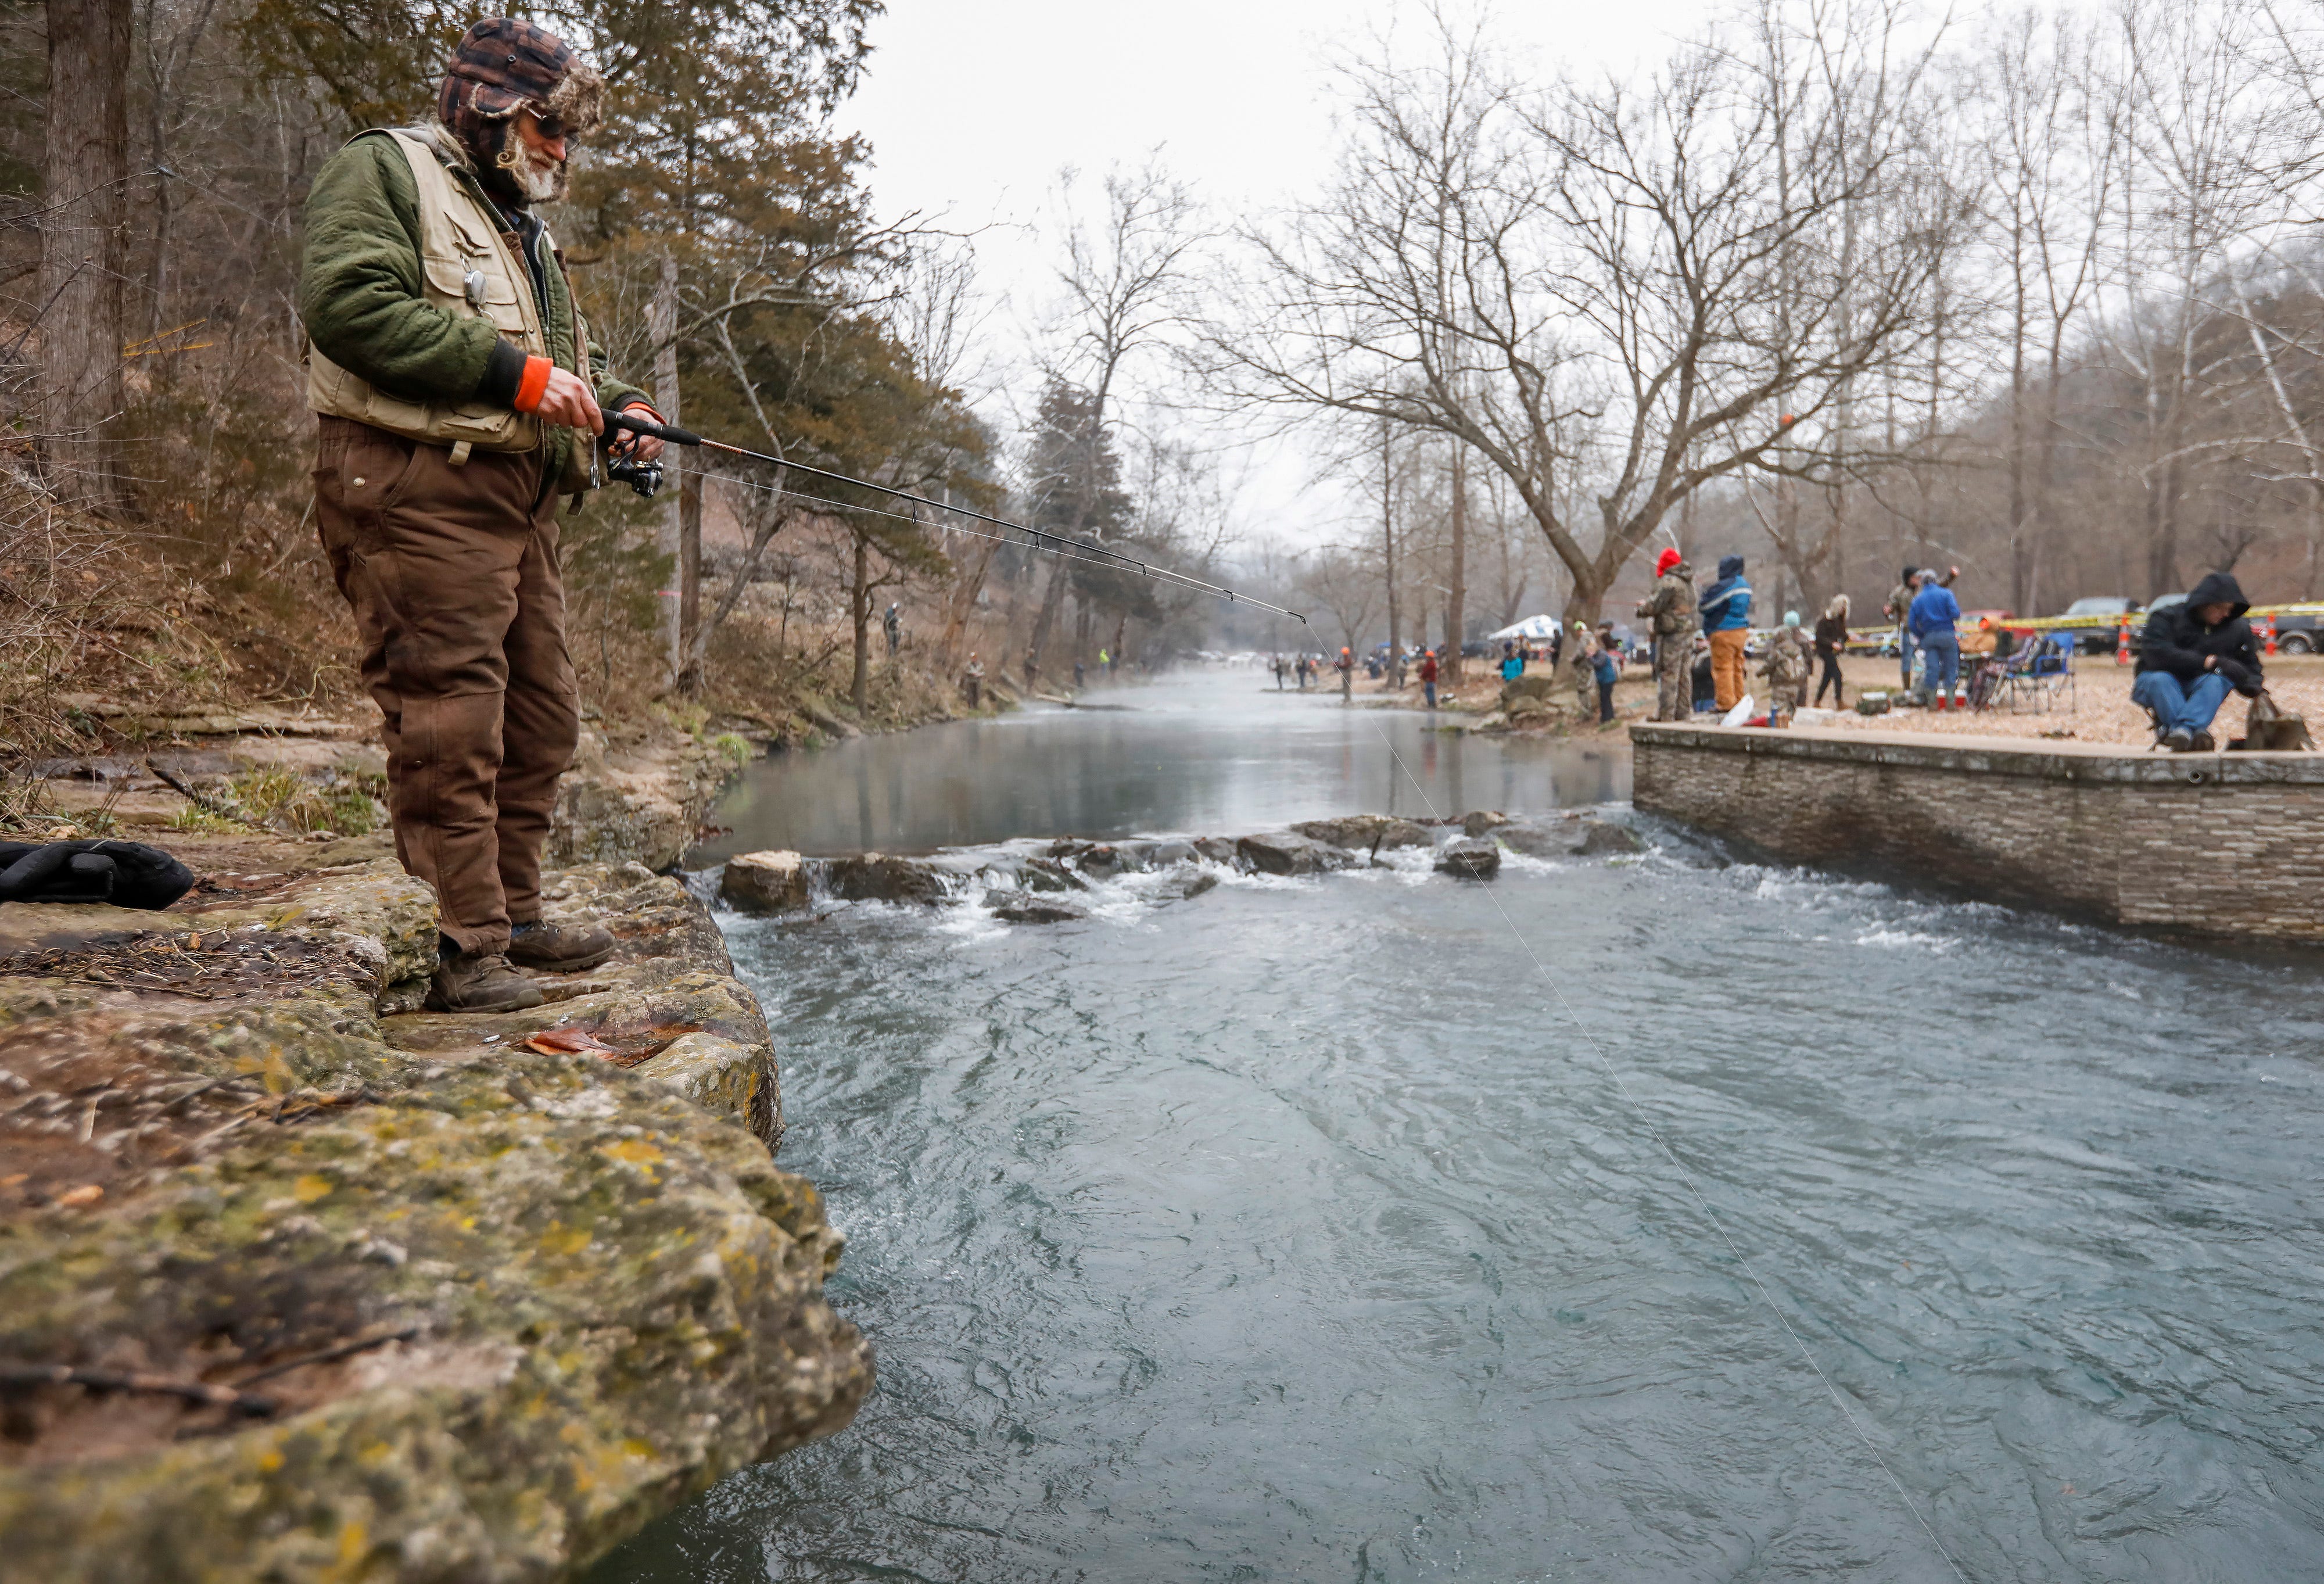 Openingday trout angler gets his birthday wish at Roaring River